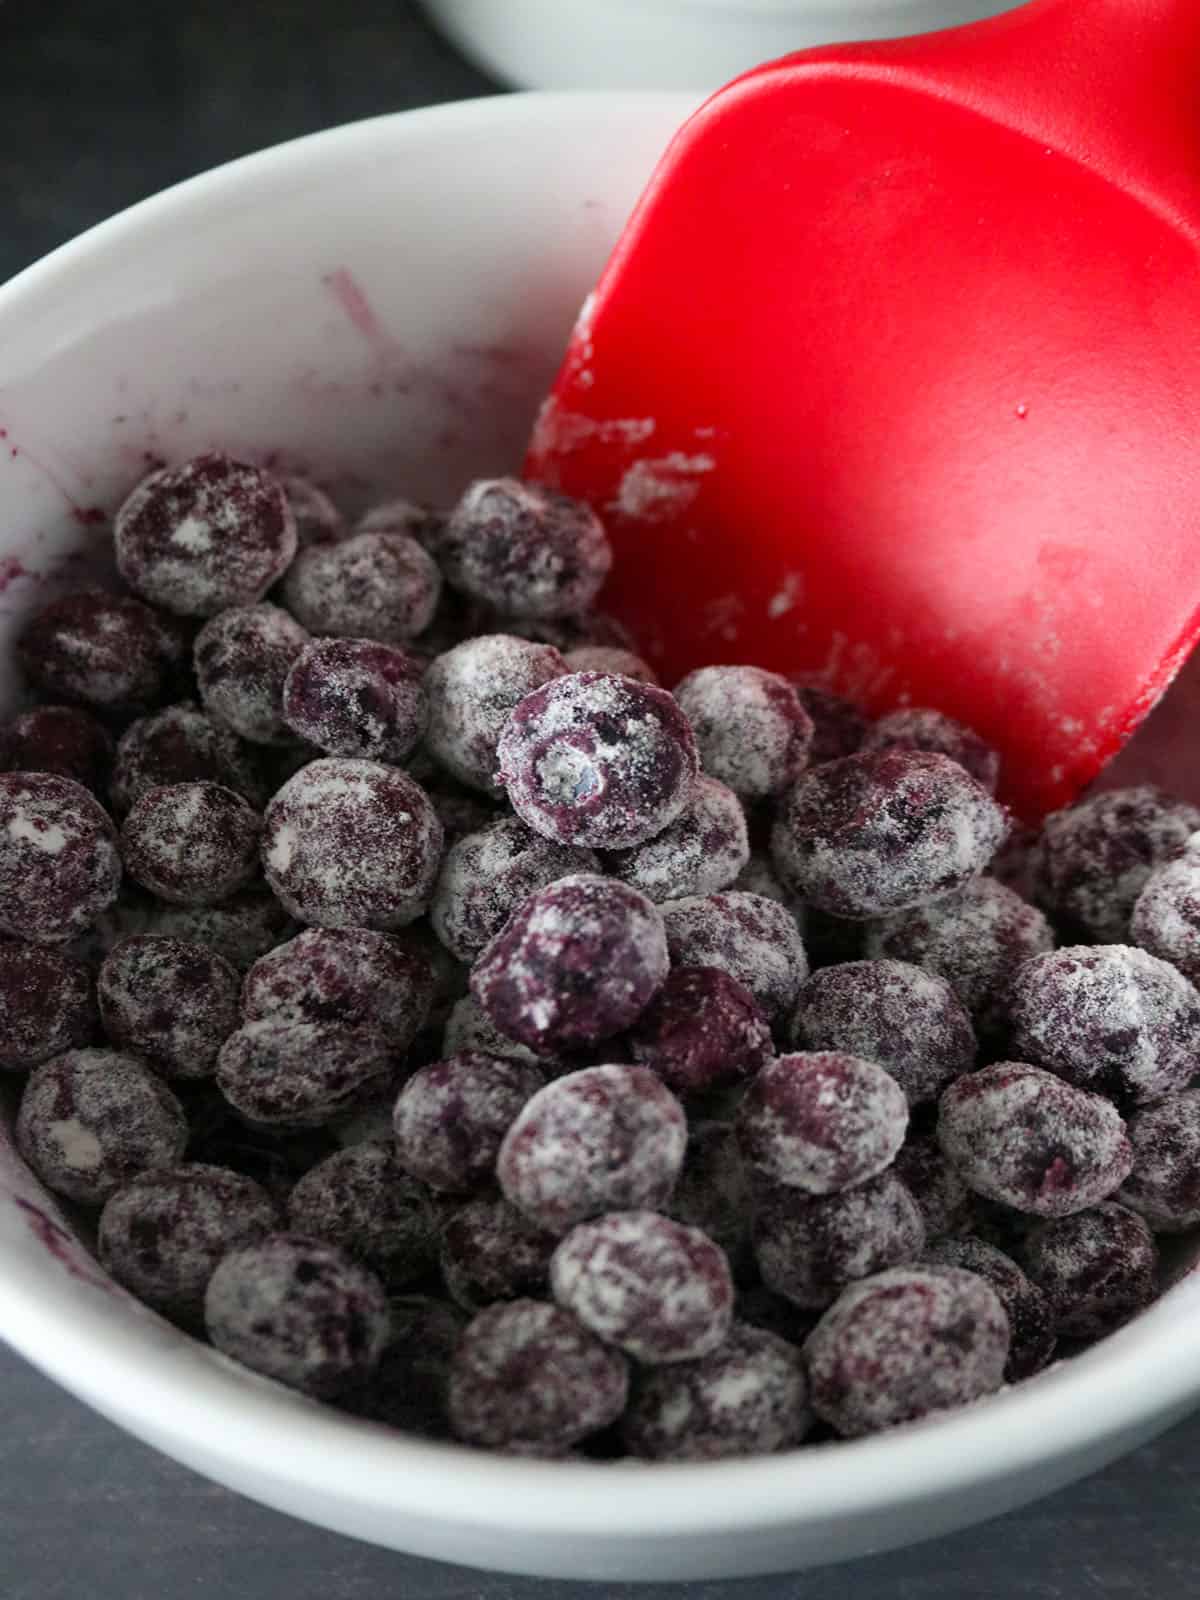 Blueberries in a bowl, coated  lightly with flour.